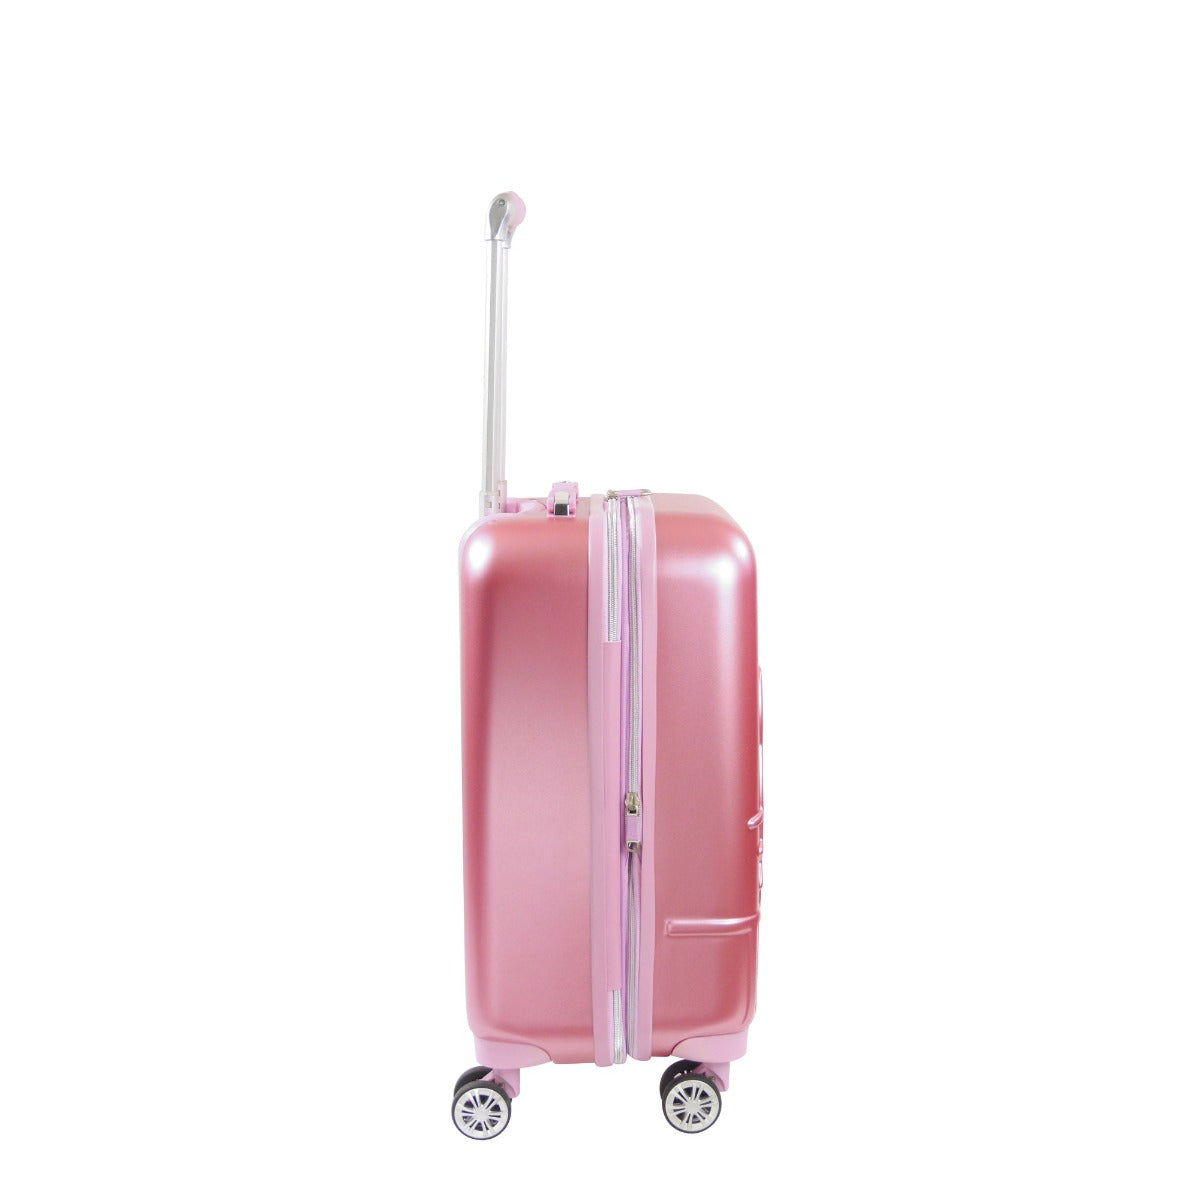 Hello Kitty x Ful 21" hard-sided spinner rolling carry-on luggage suitcase pink